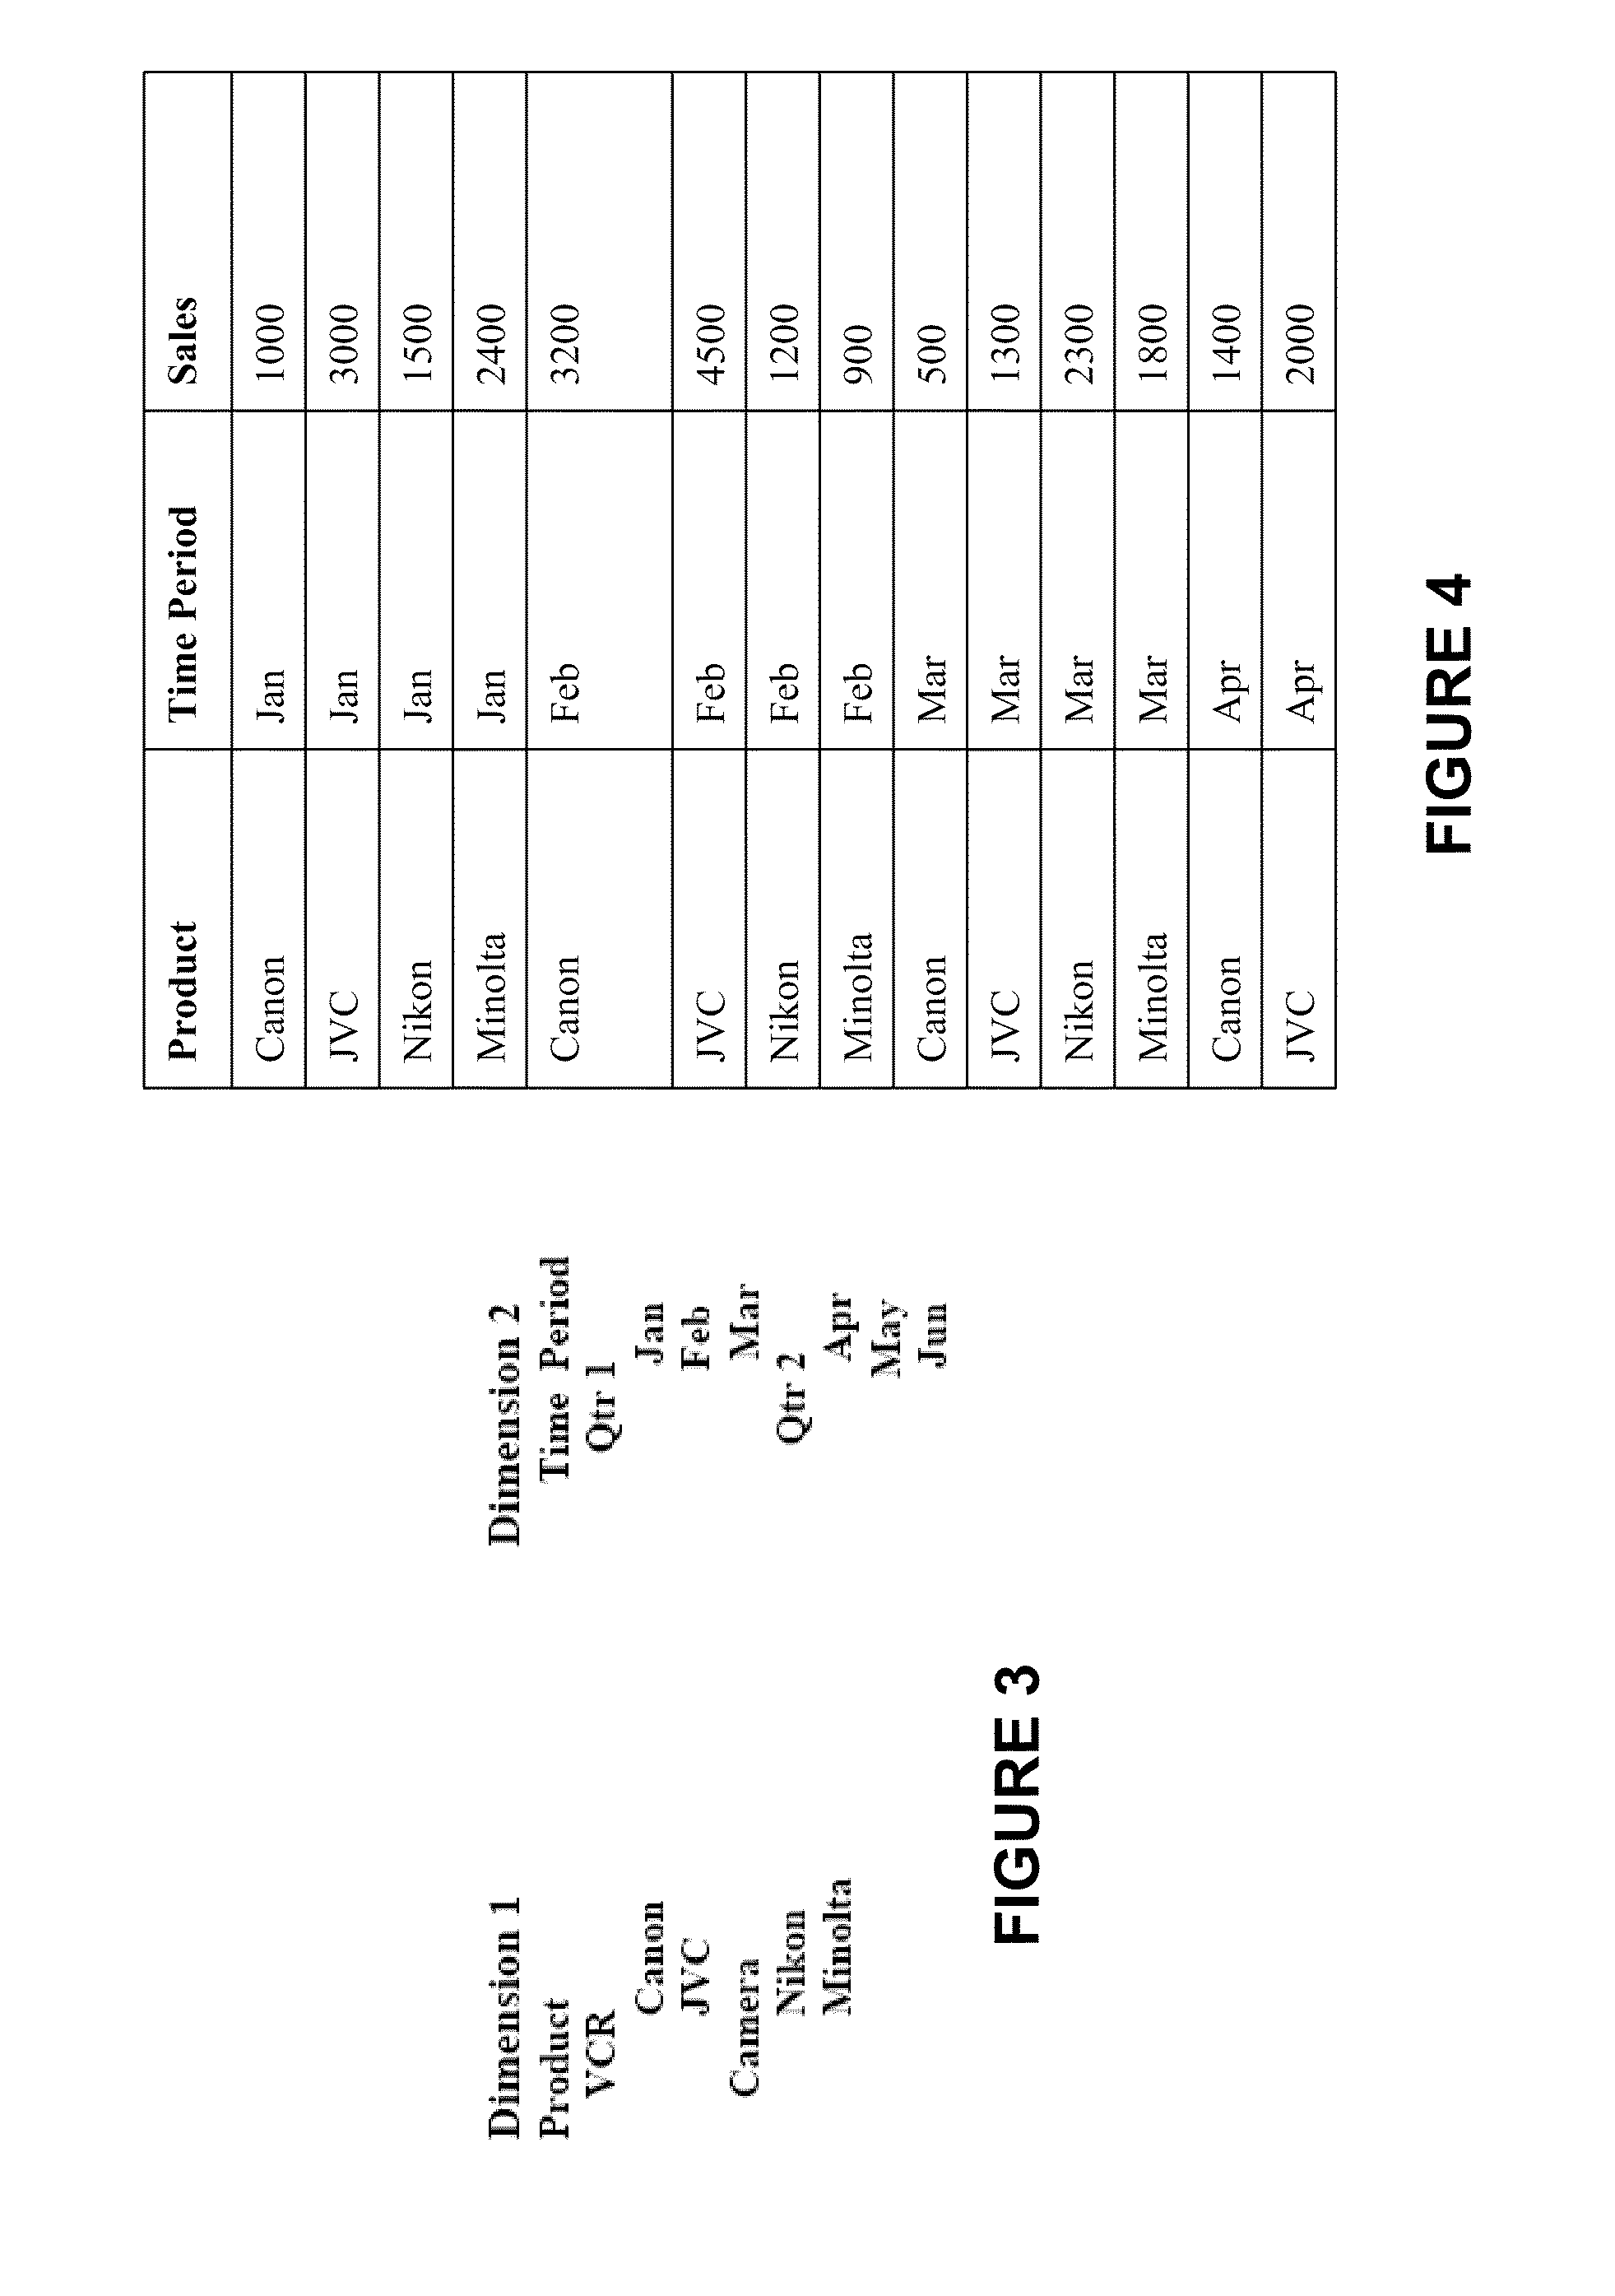 System and Method for analyzing and reporting extensible data from multiple sources in multiple formats